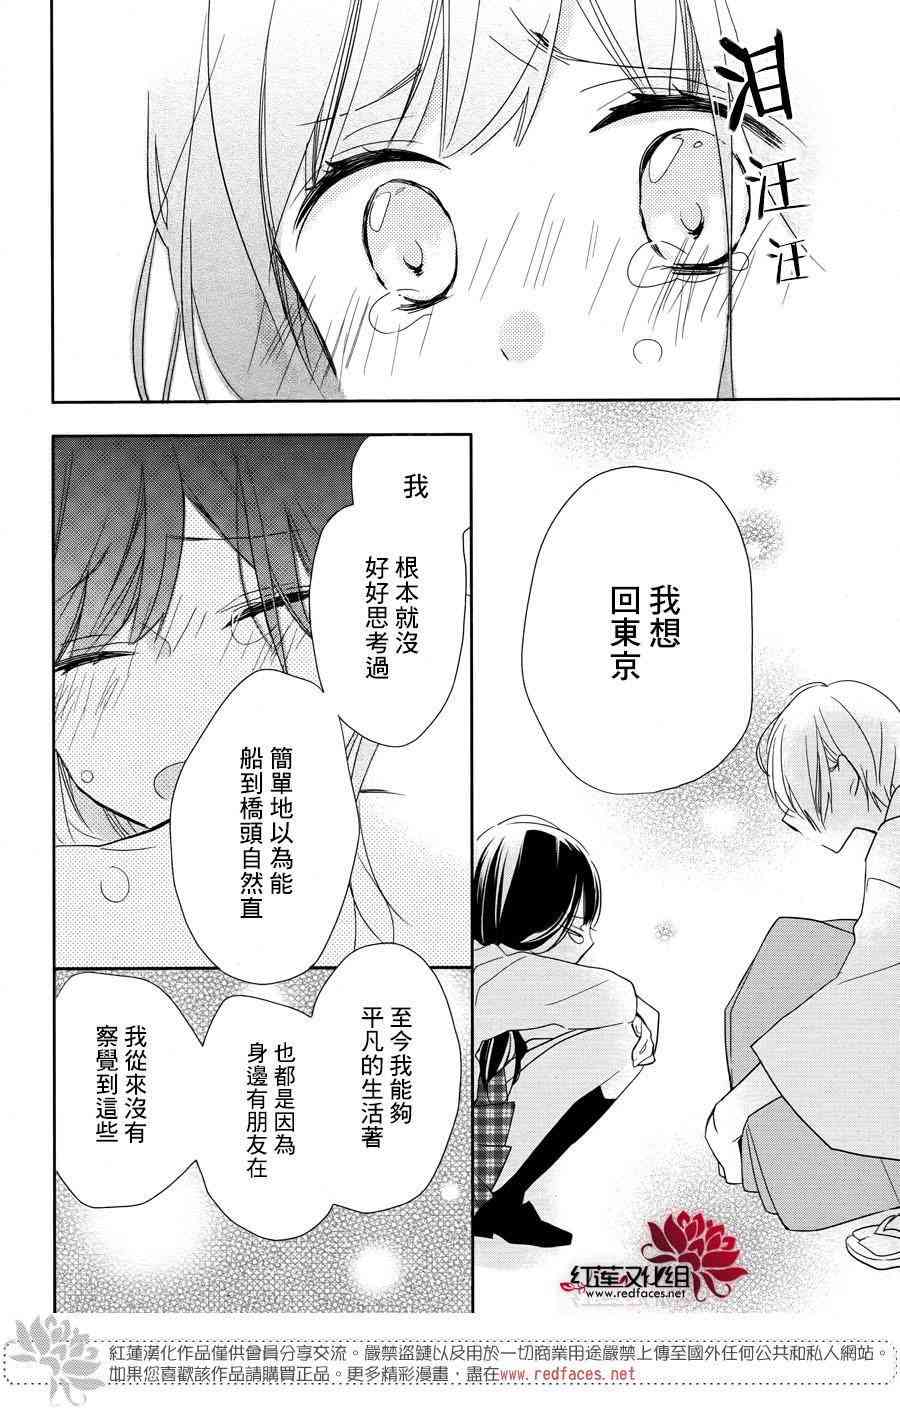 If given a second chance - 1話 - 1